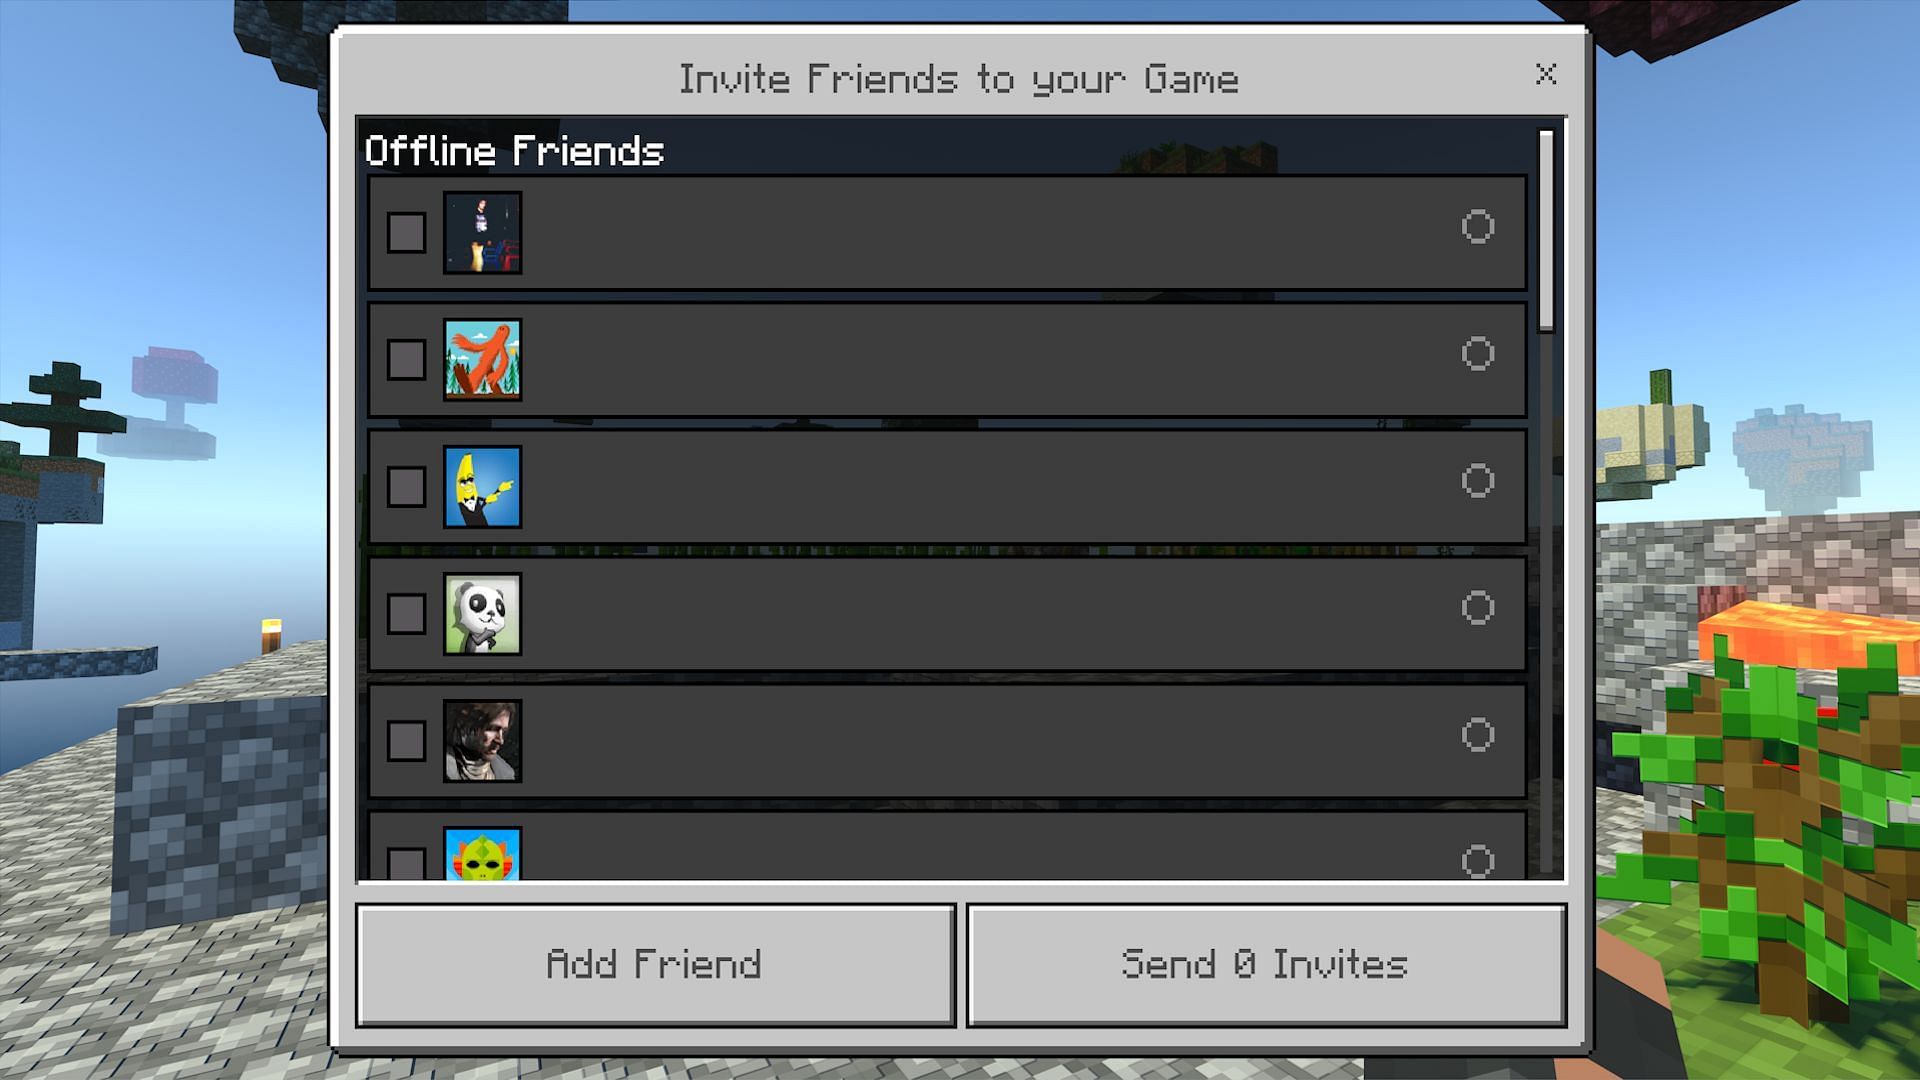 Usernames in this example have been blocked for privacy, but they are normally visible (Image via Mojang)